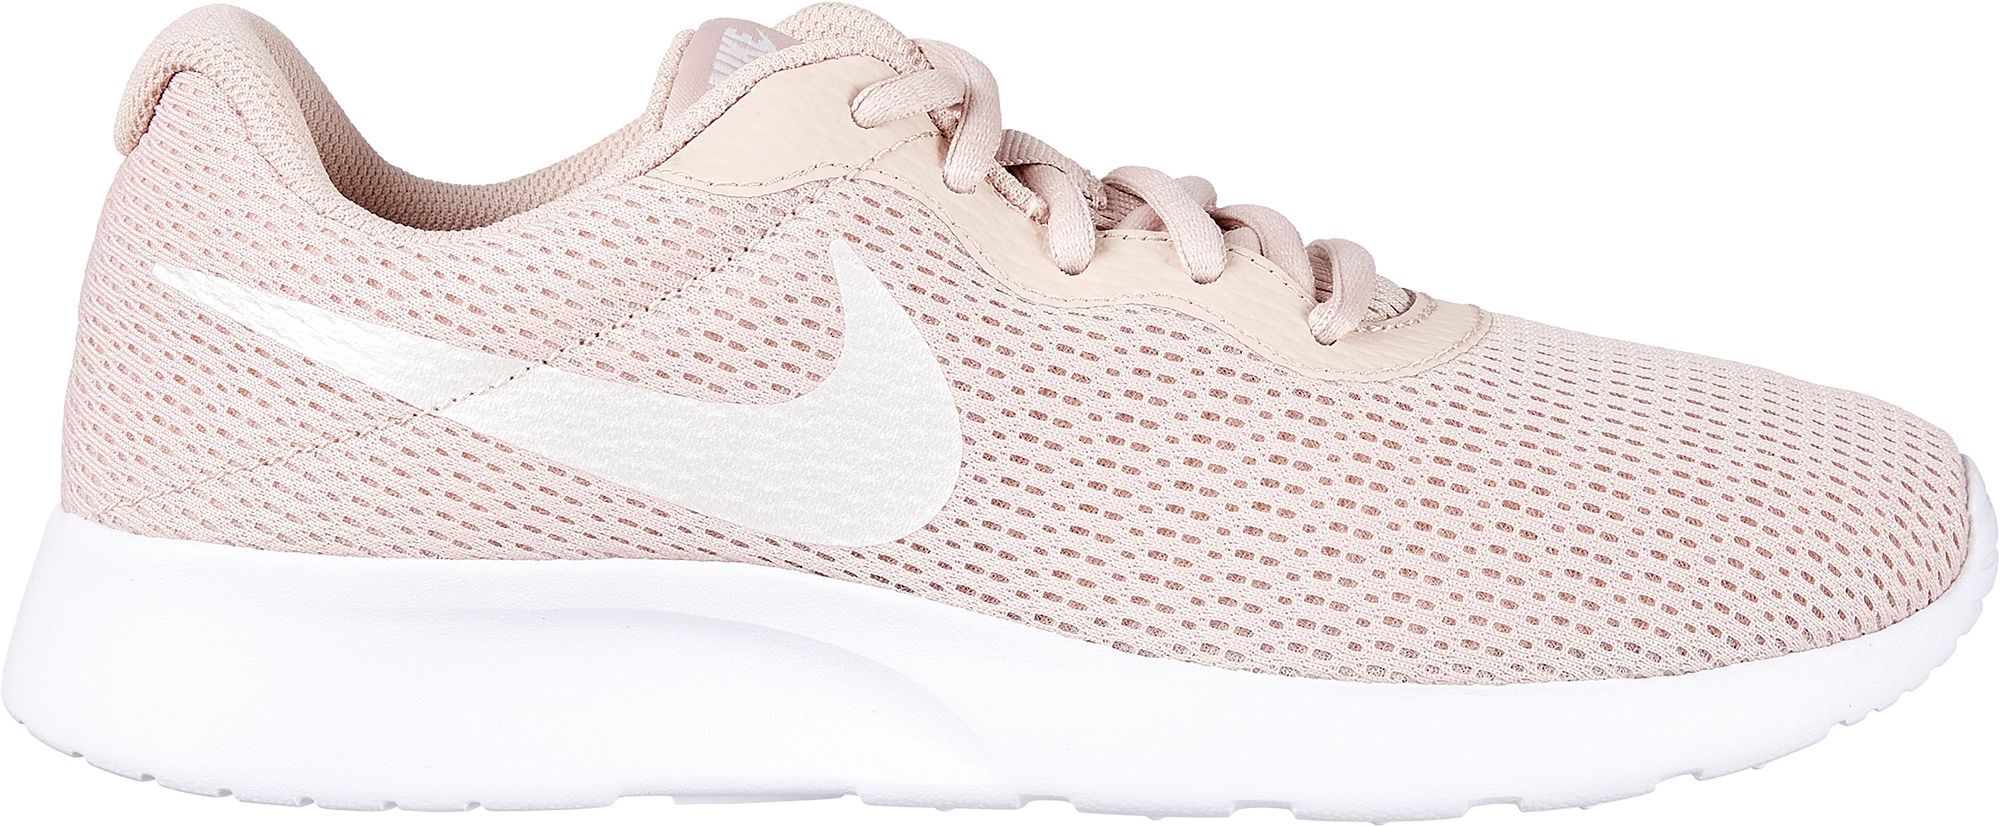 womens nike shoes rose gold